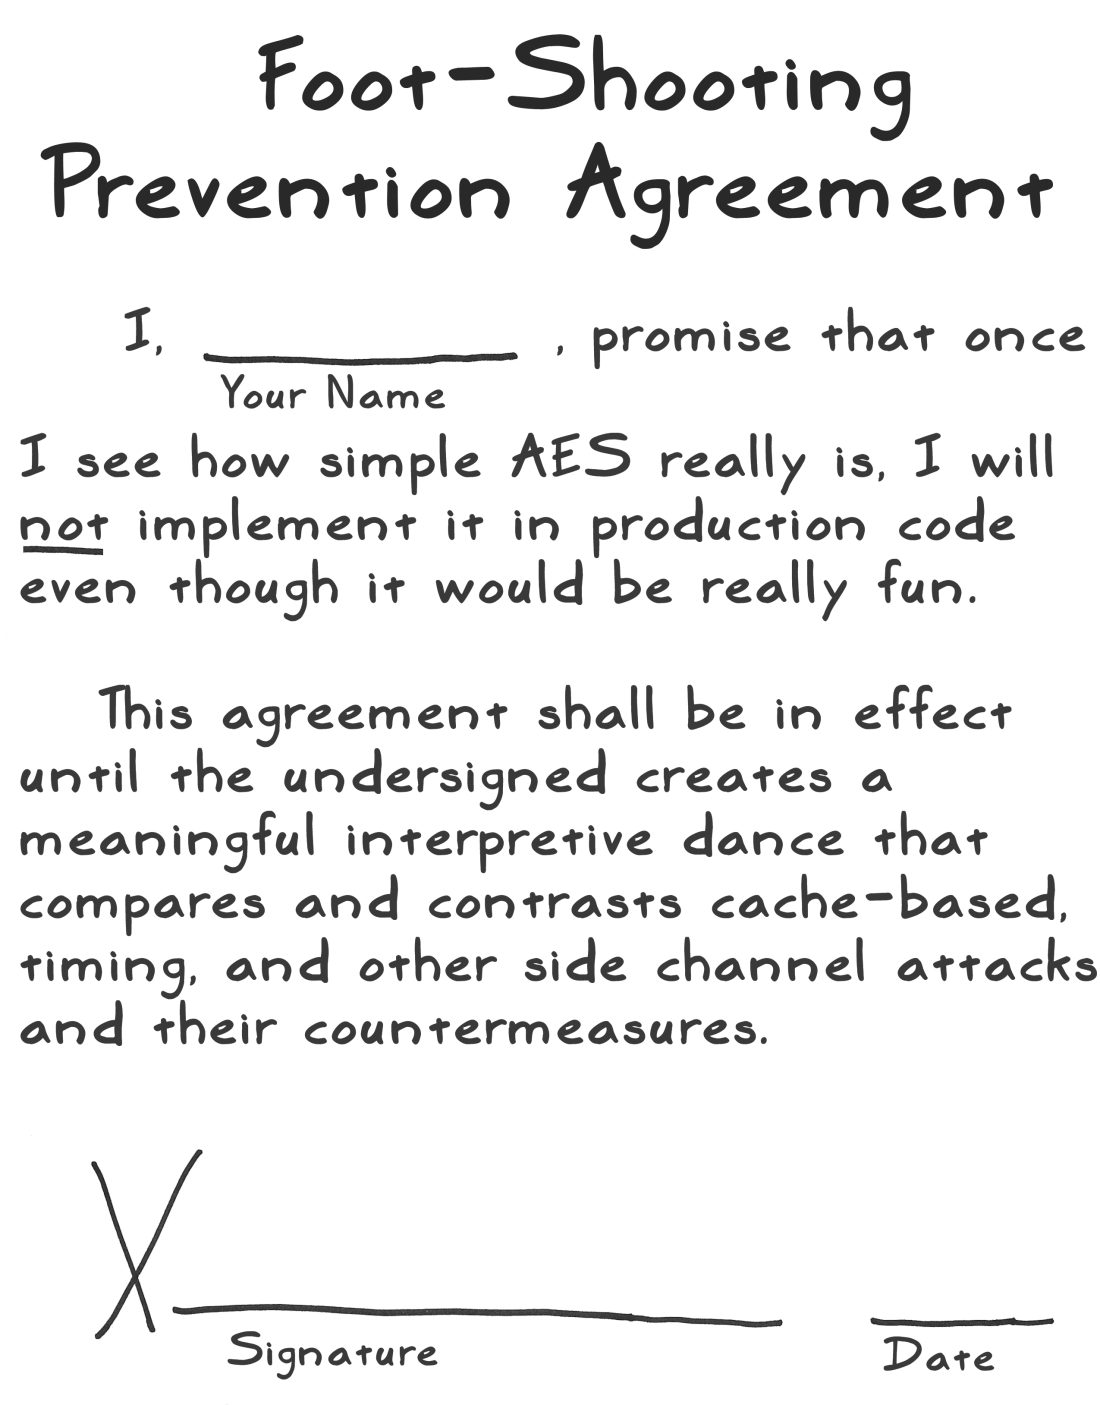 A pretend legal document for you to sign, titled Foot-Shooting Prevention Agreement, where you agree to not implement AES yourself in production code, even if you think it would be really fun.